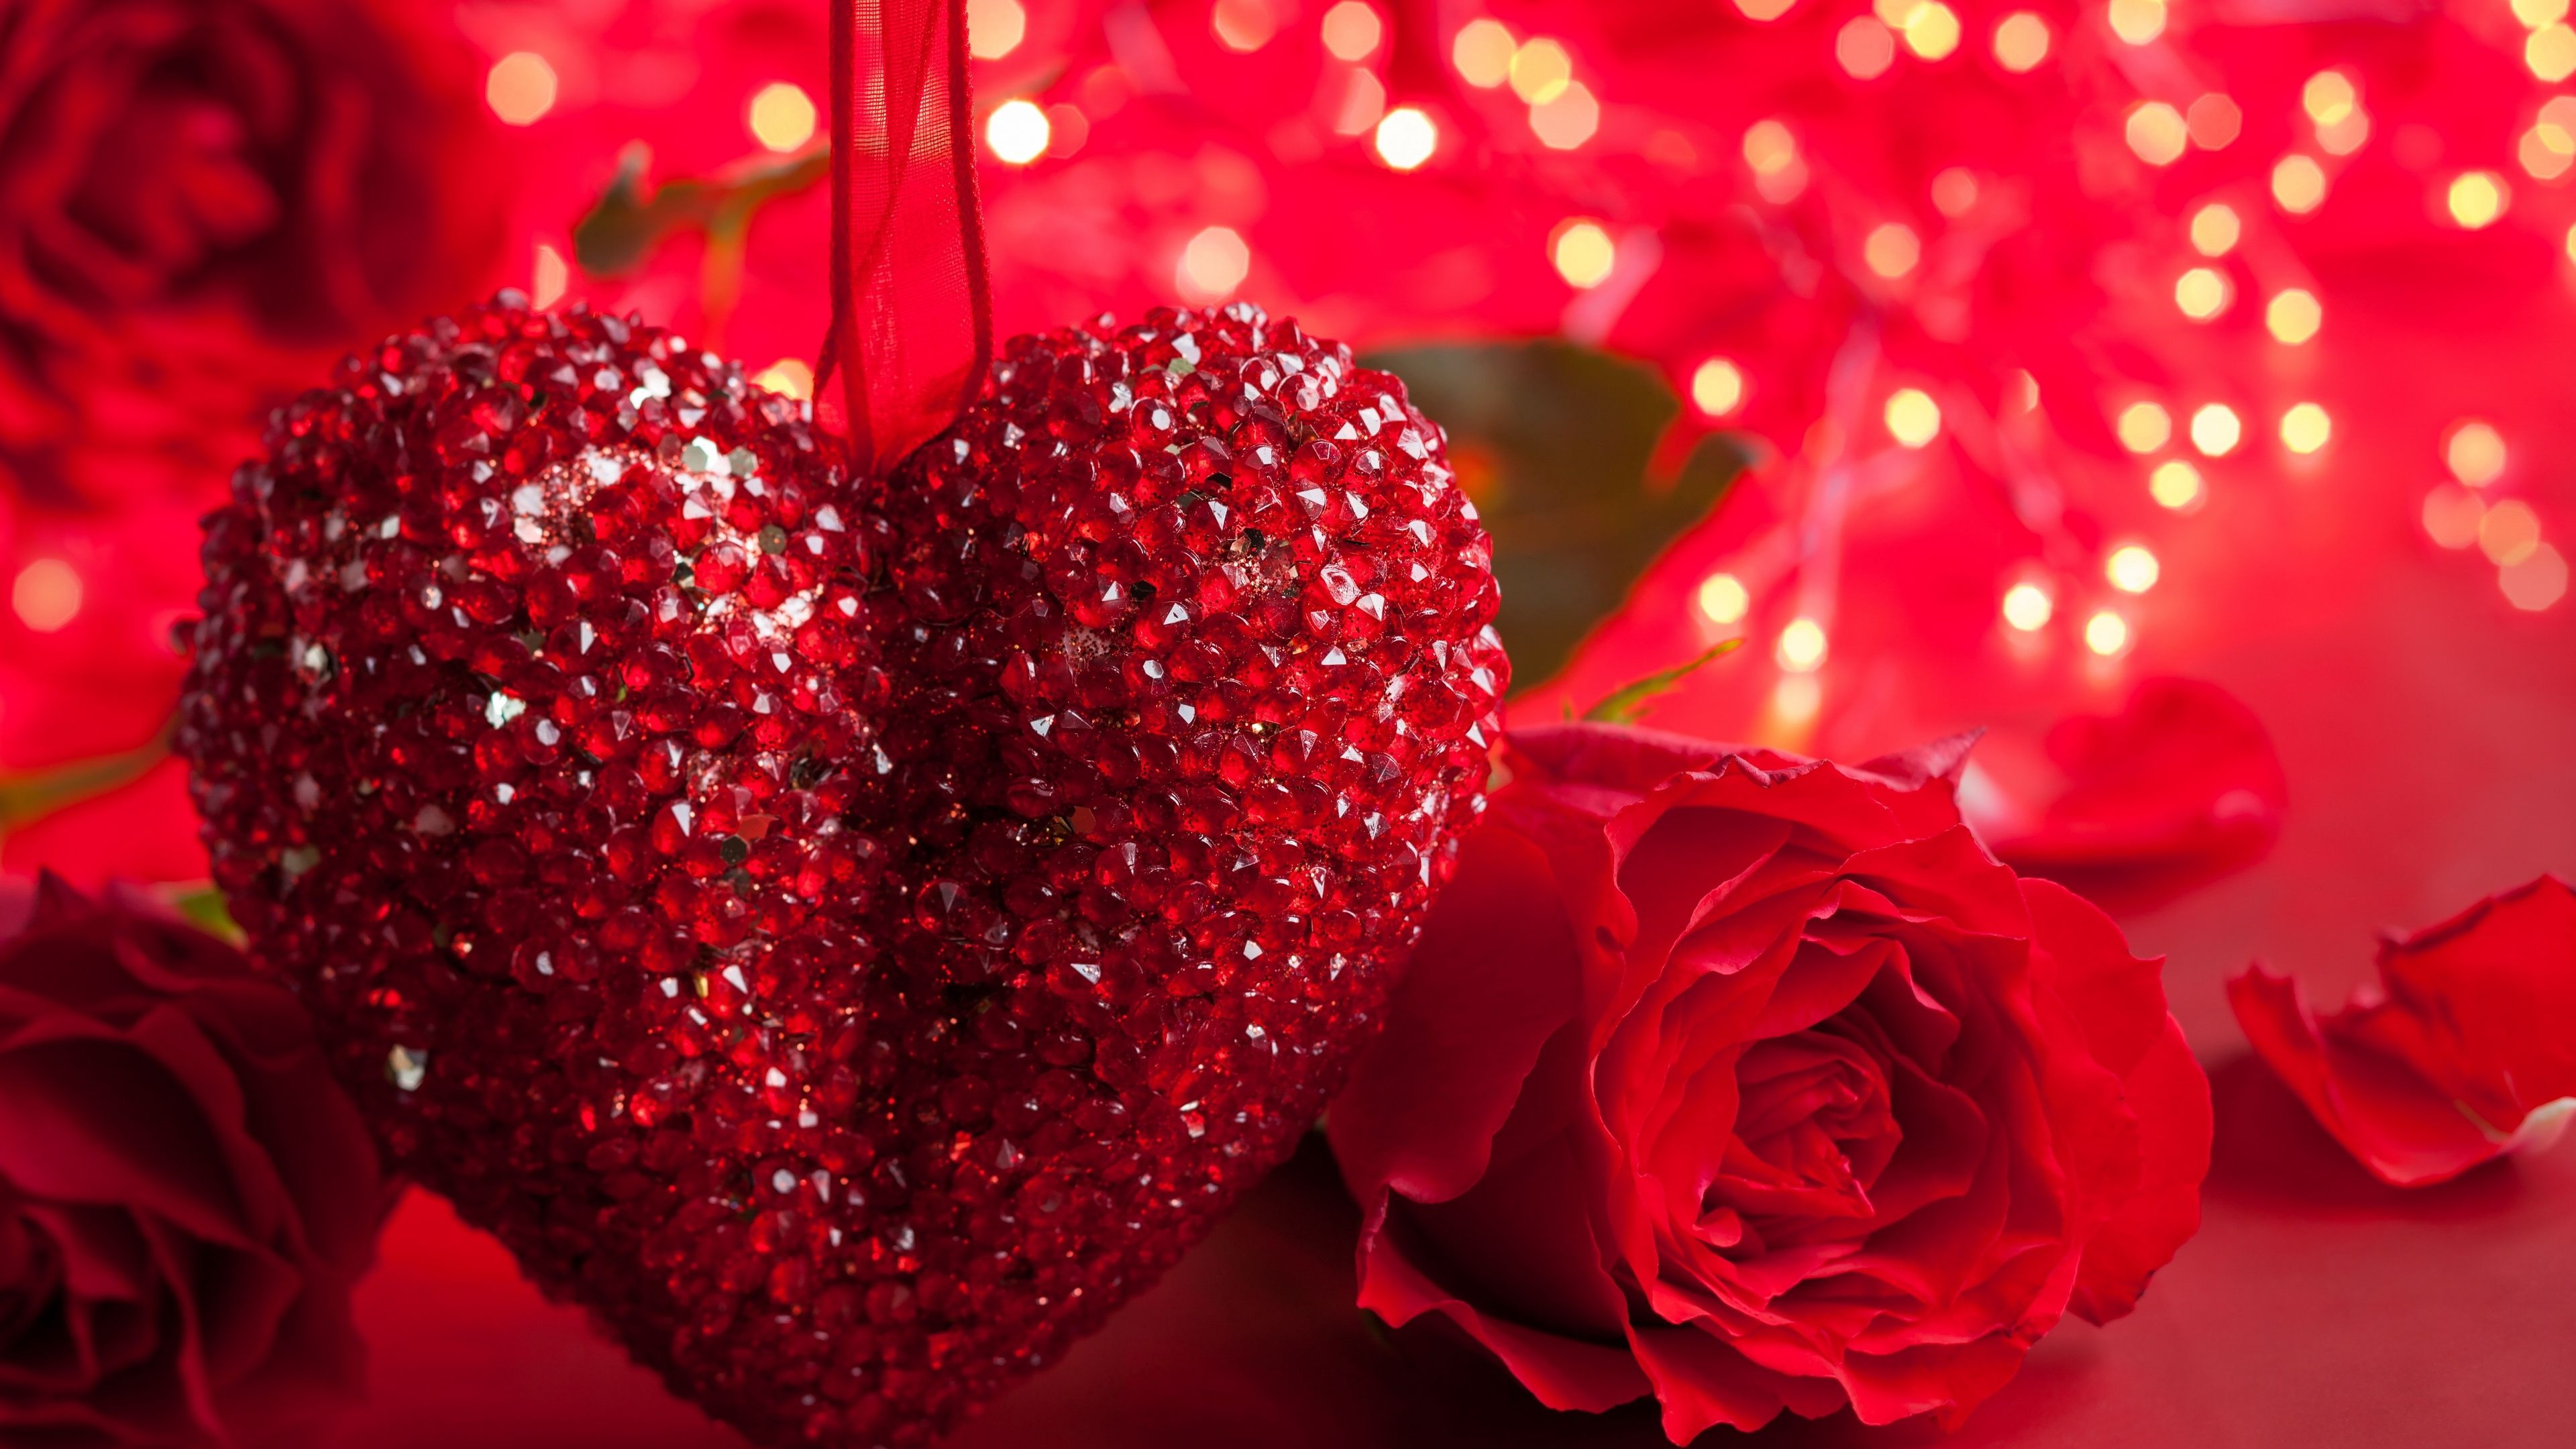 Valentine's Day, Love and romance, Rose and heart, Romantic atmosphere, 3840x2160 4K Desktop